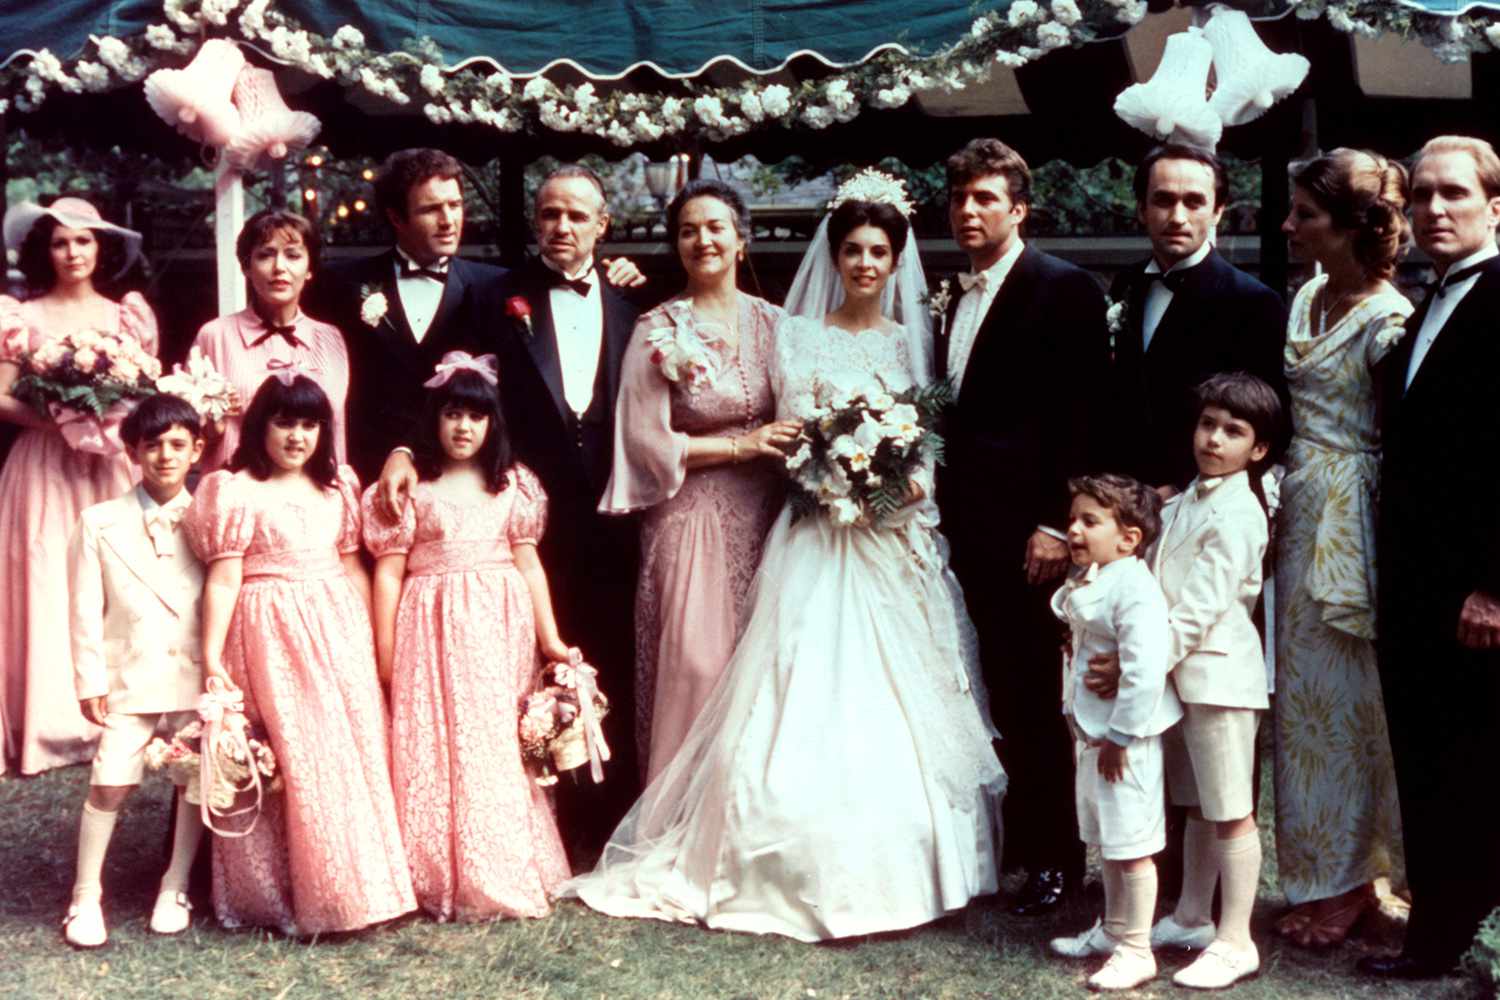 James Caan, Marlon Brando and the rest of the wedding party in a scene from the film 'The Godfather', 1972. (Photo by Warner Brothers/Getty Images)